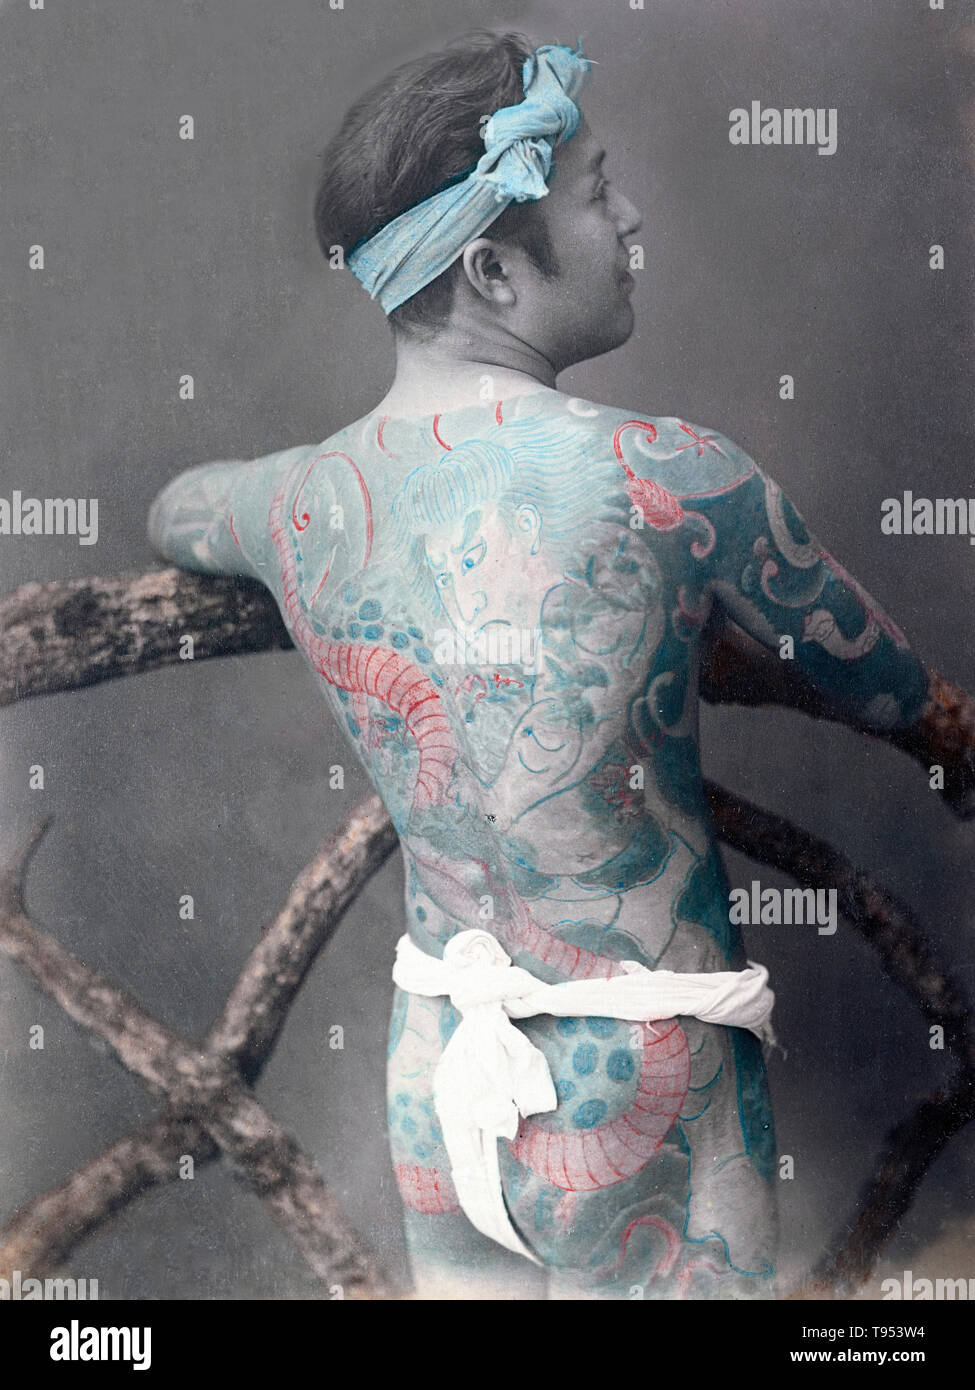 Japanese man with full-body tattoo, from c. 1870s - 1890s. Photographed by Kusakabe Kimbei (Japanese, 1841 - 1934, active 1880s - about 1912) or Baron Raimund von Stillfried (Austrian, 1839 - 1911). Hand-colored albumen silver print. Stock Photo